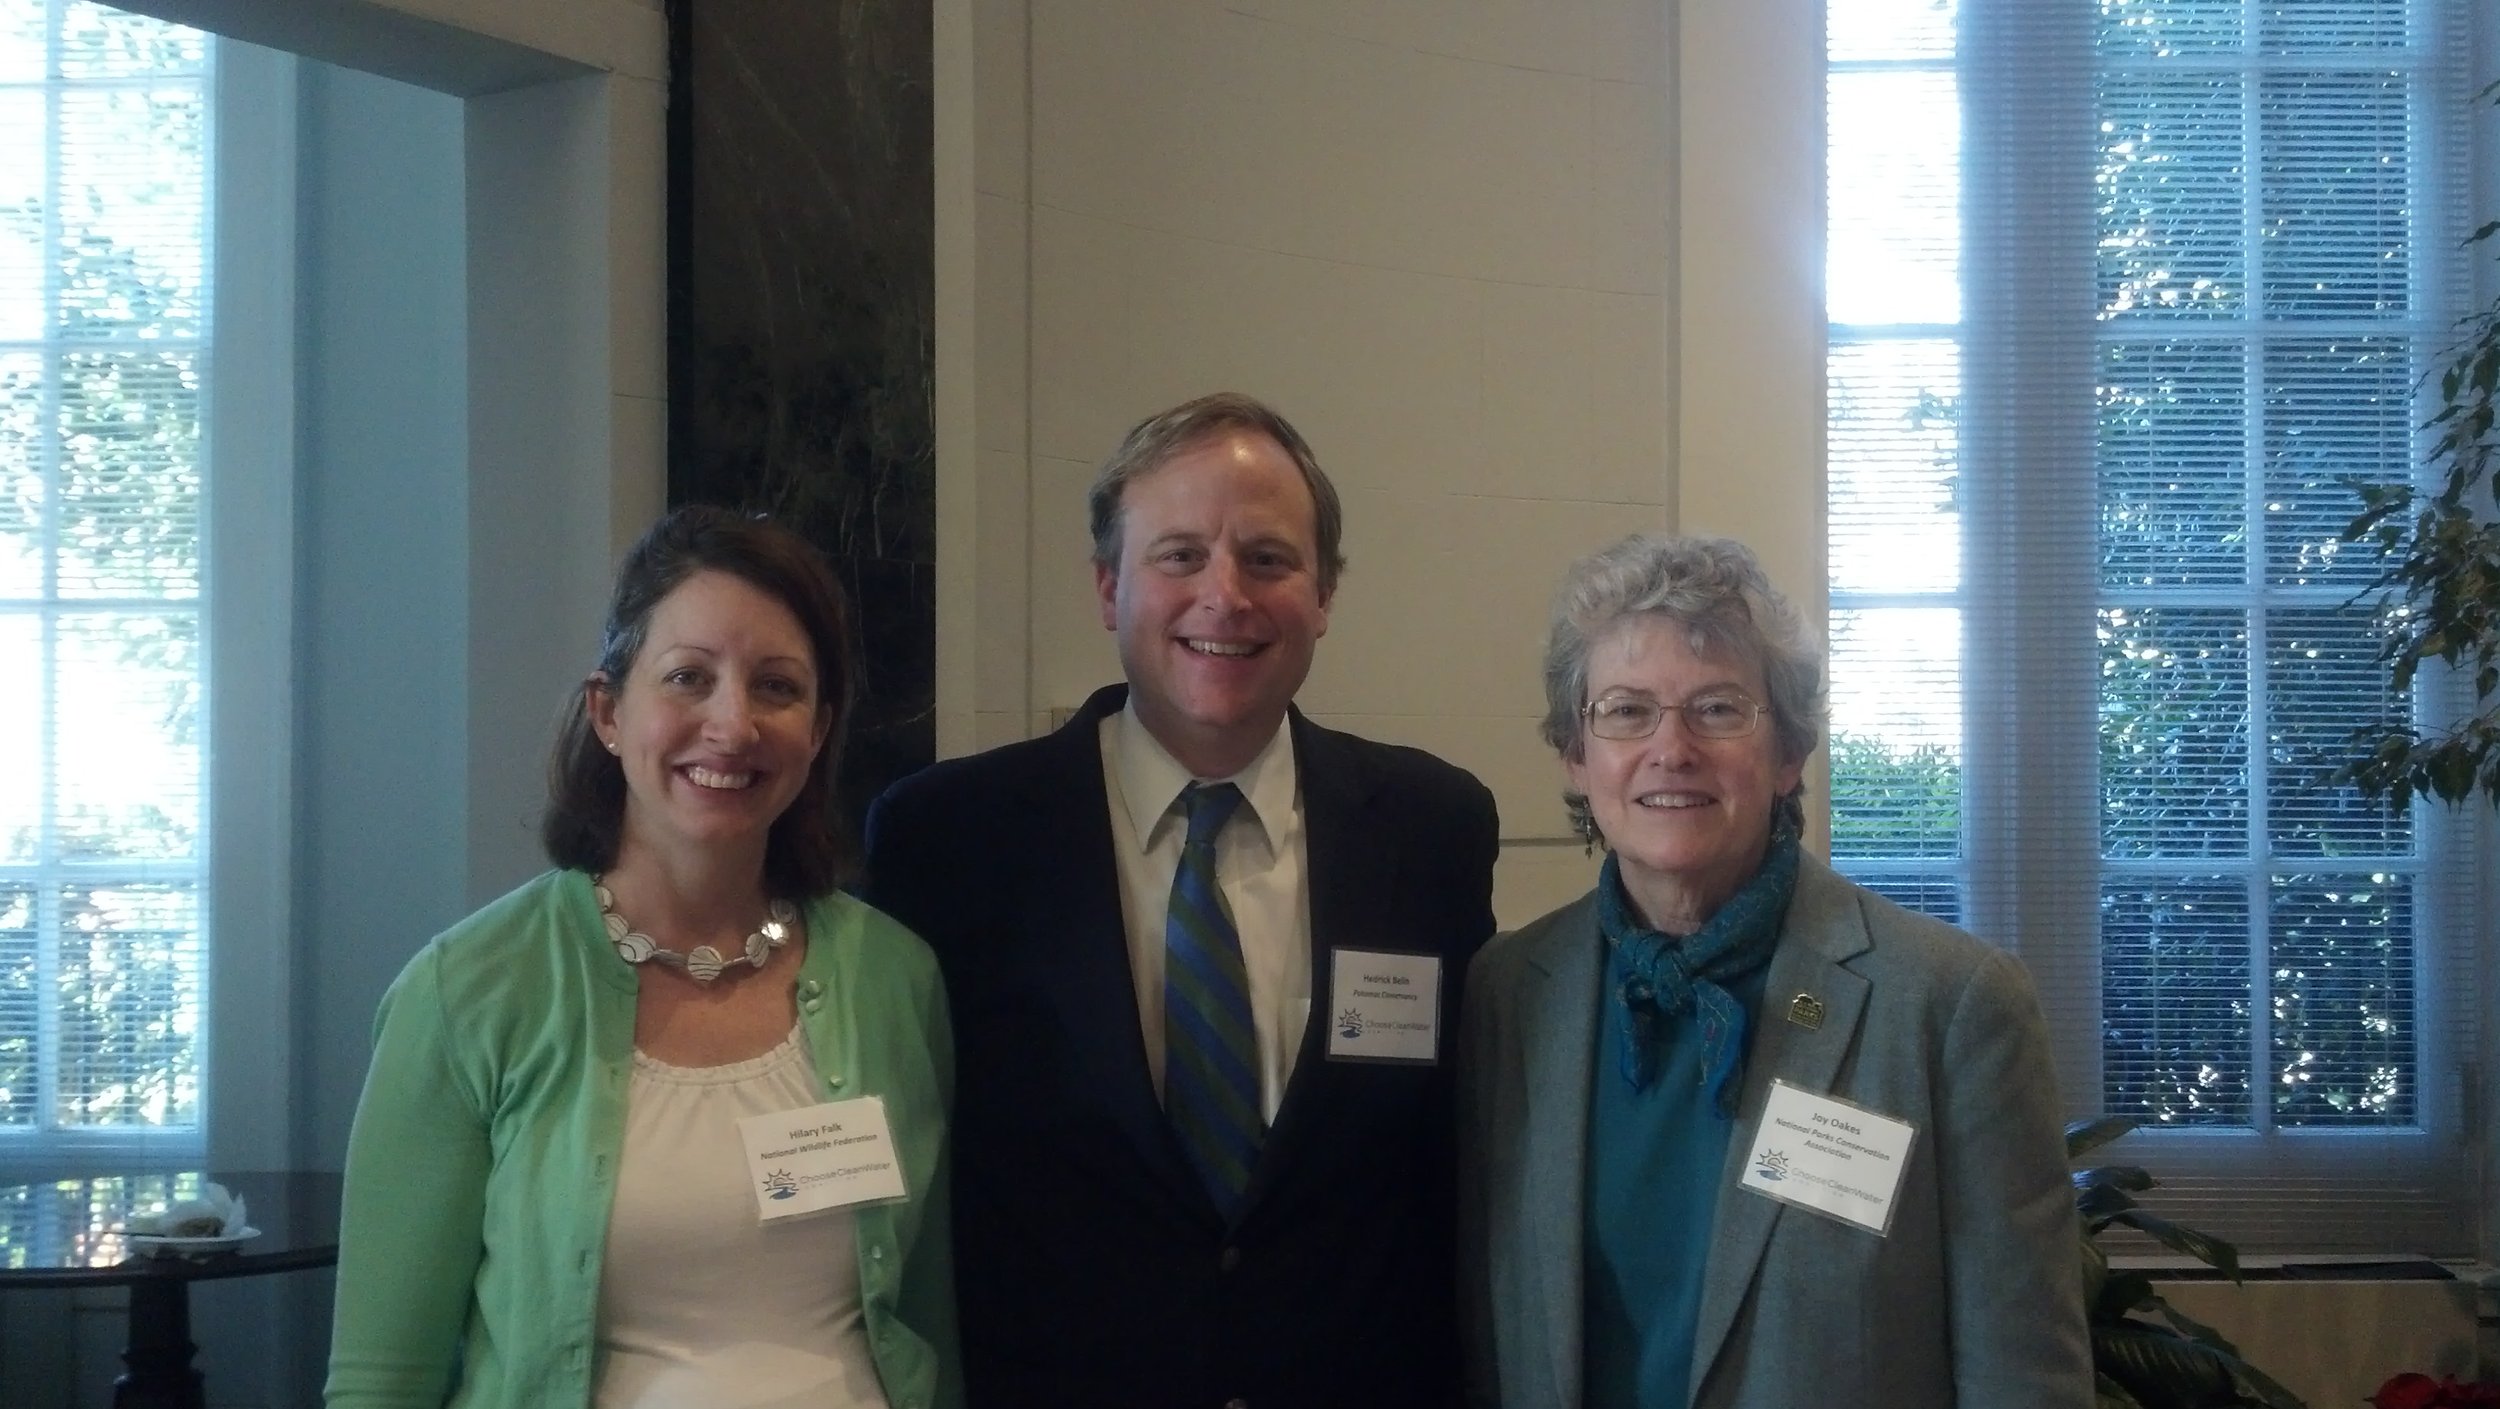  Co-chairs Hilary Harp Falk, Hedrick Belin, and Joy Oakes at the 2013 Annual Meeting 